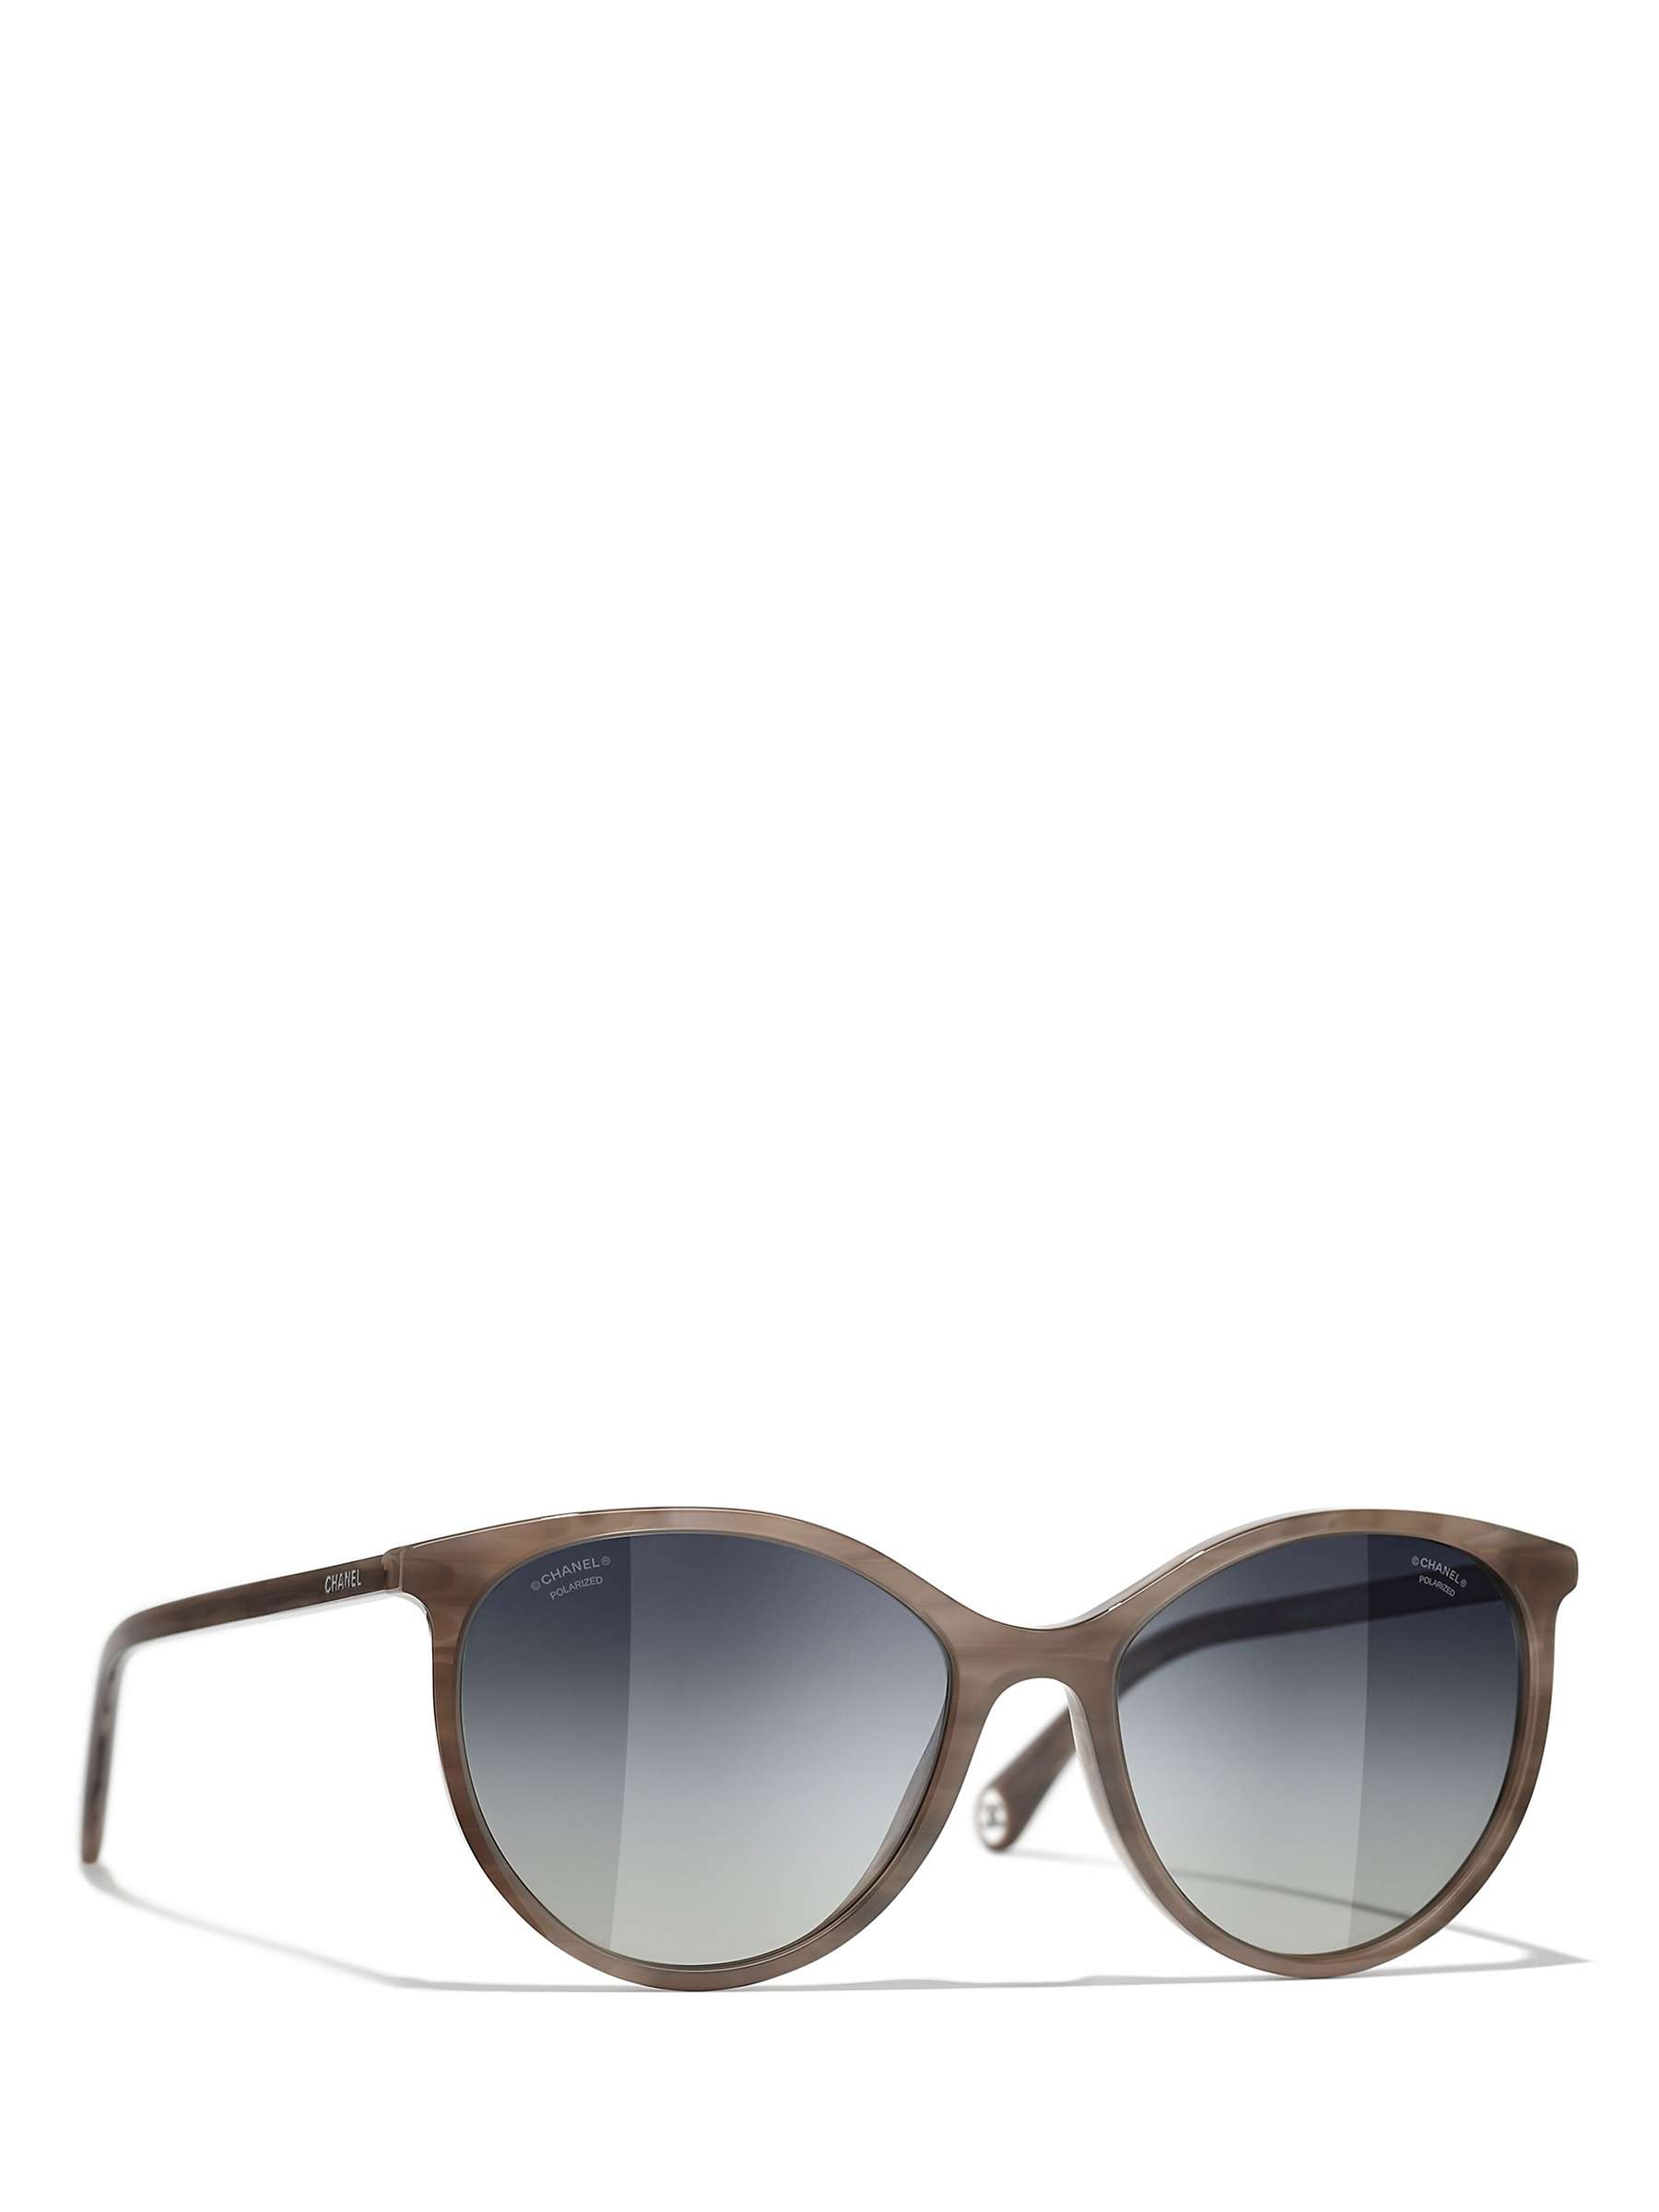 Buy CHANEL Oval Sunglasses CH5448 Grey Horn/Grey Gradient Online at johnlewis.com